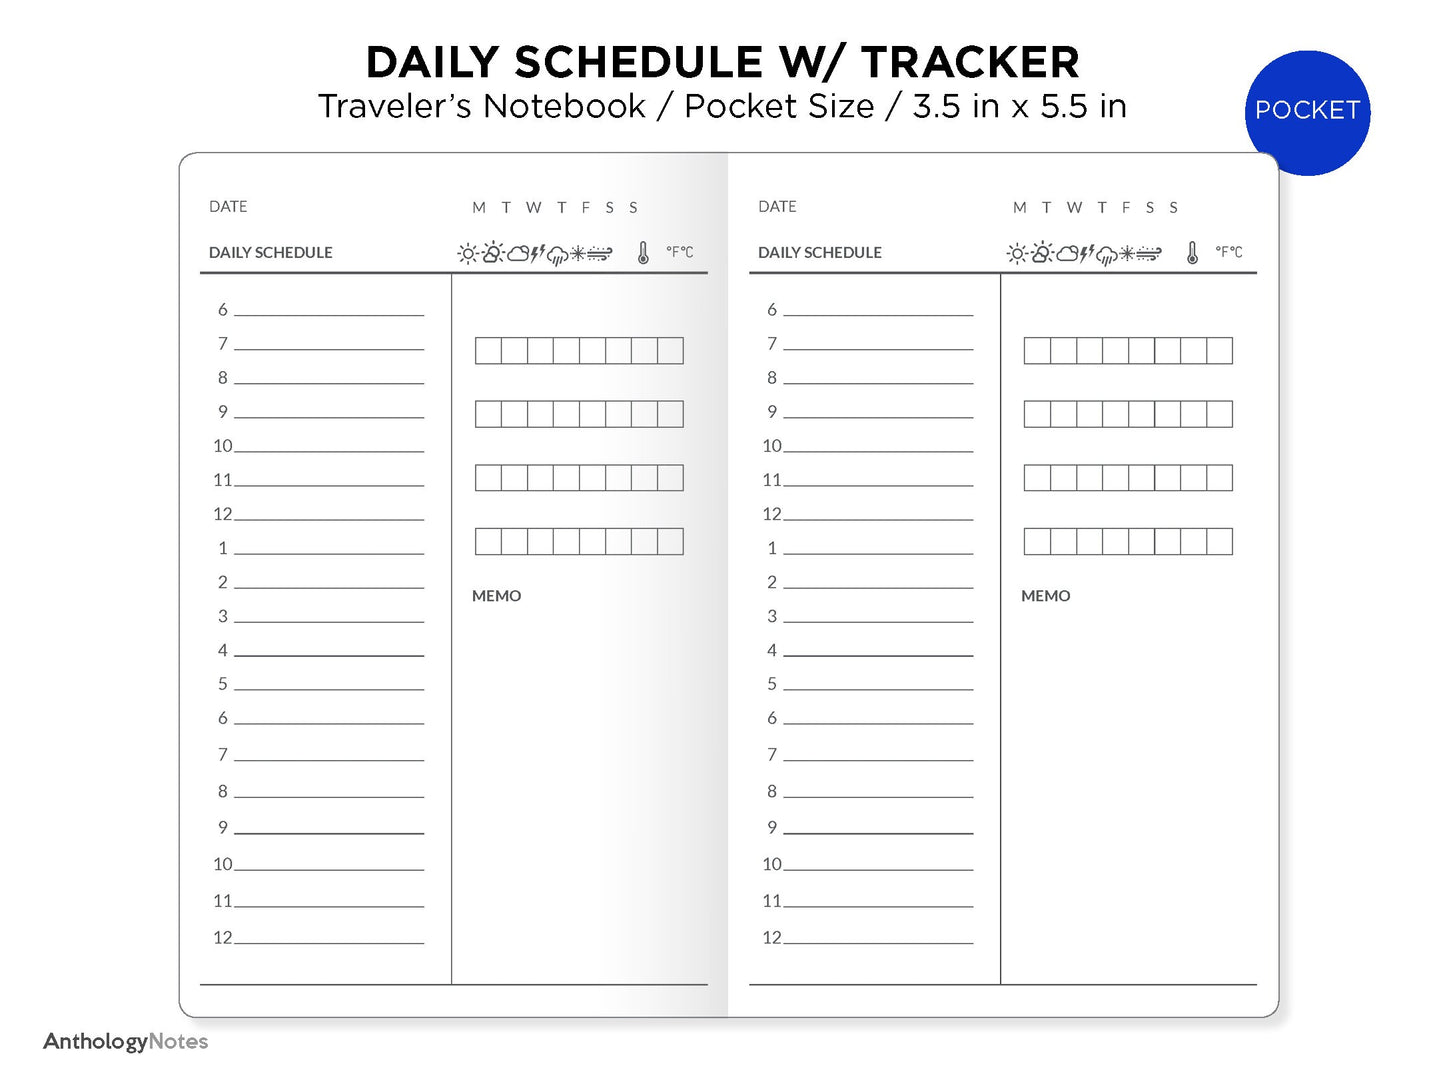 TN POCKET Daily Schedule with Tracker Printable Traveler's Notebook Insert FN027